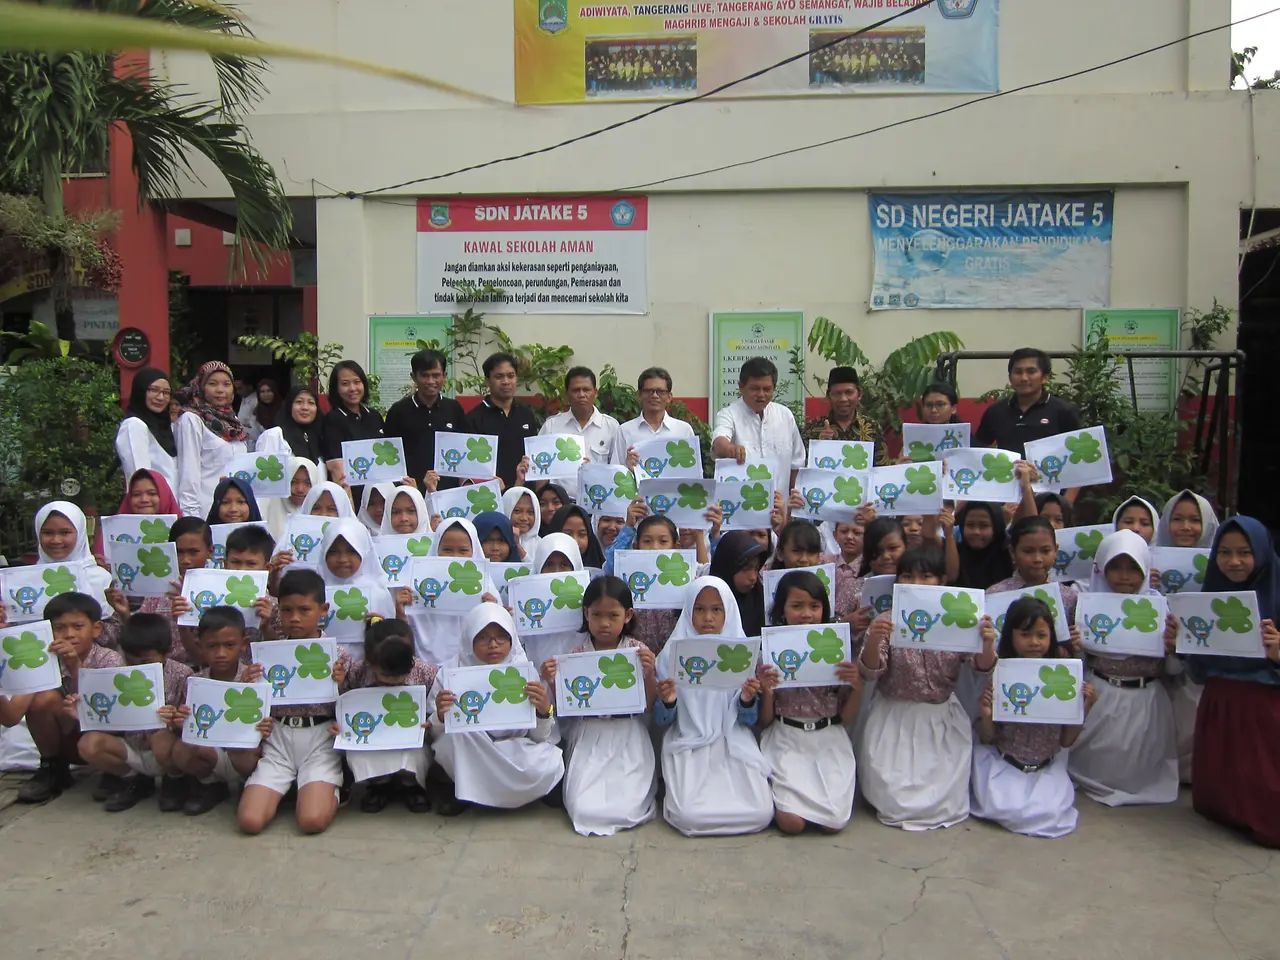 Henkel Sustainability Ambassadors together with the schoolchildren of SDN Cibodas 4 who are now certified Sustainability Champions.